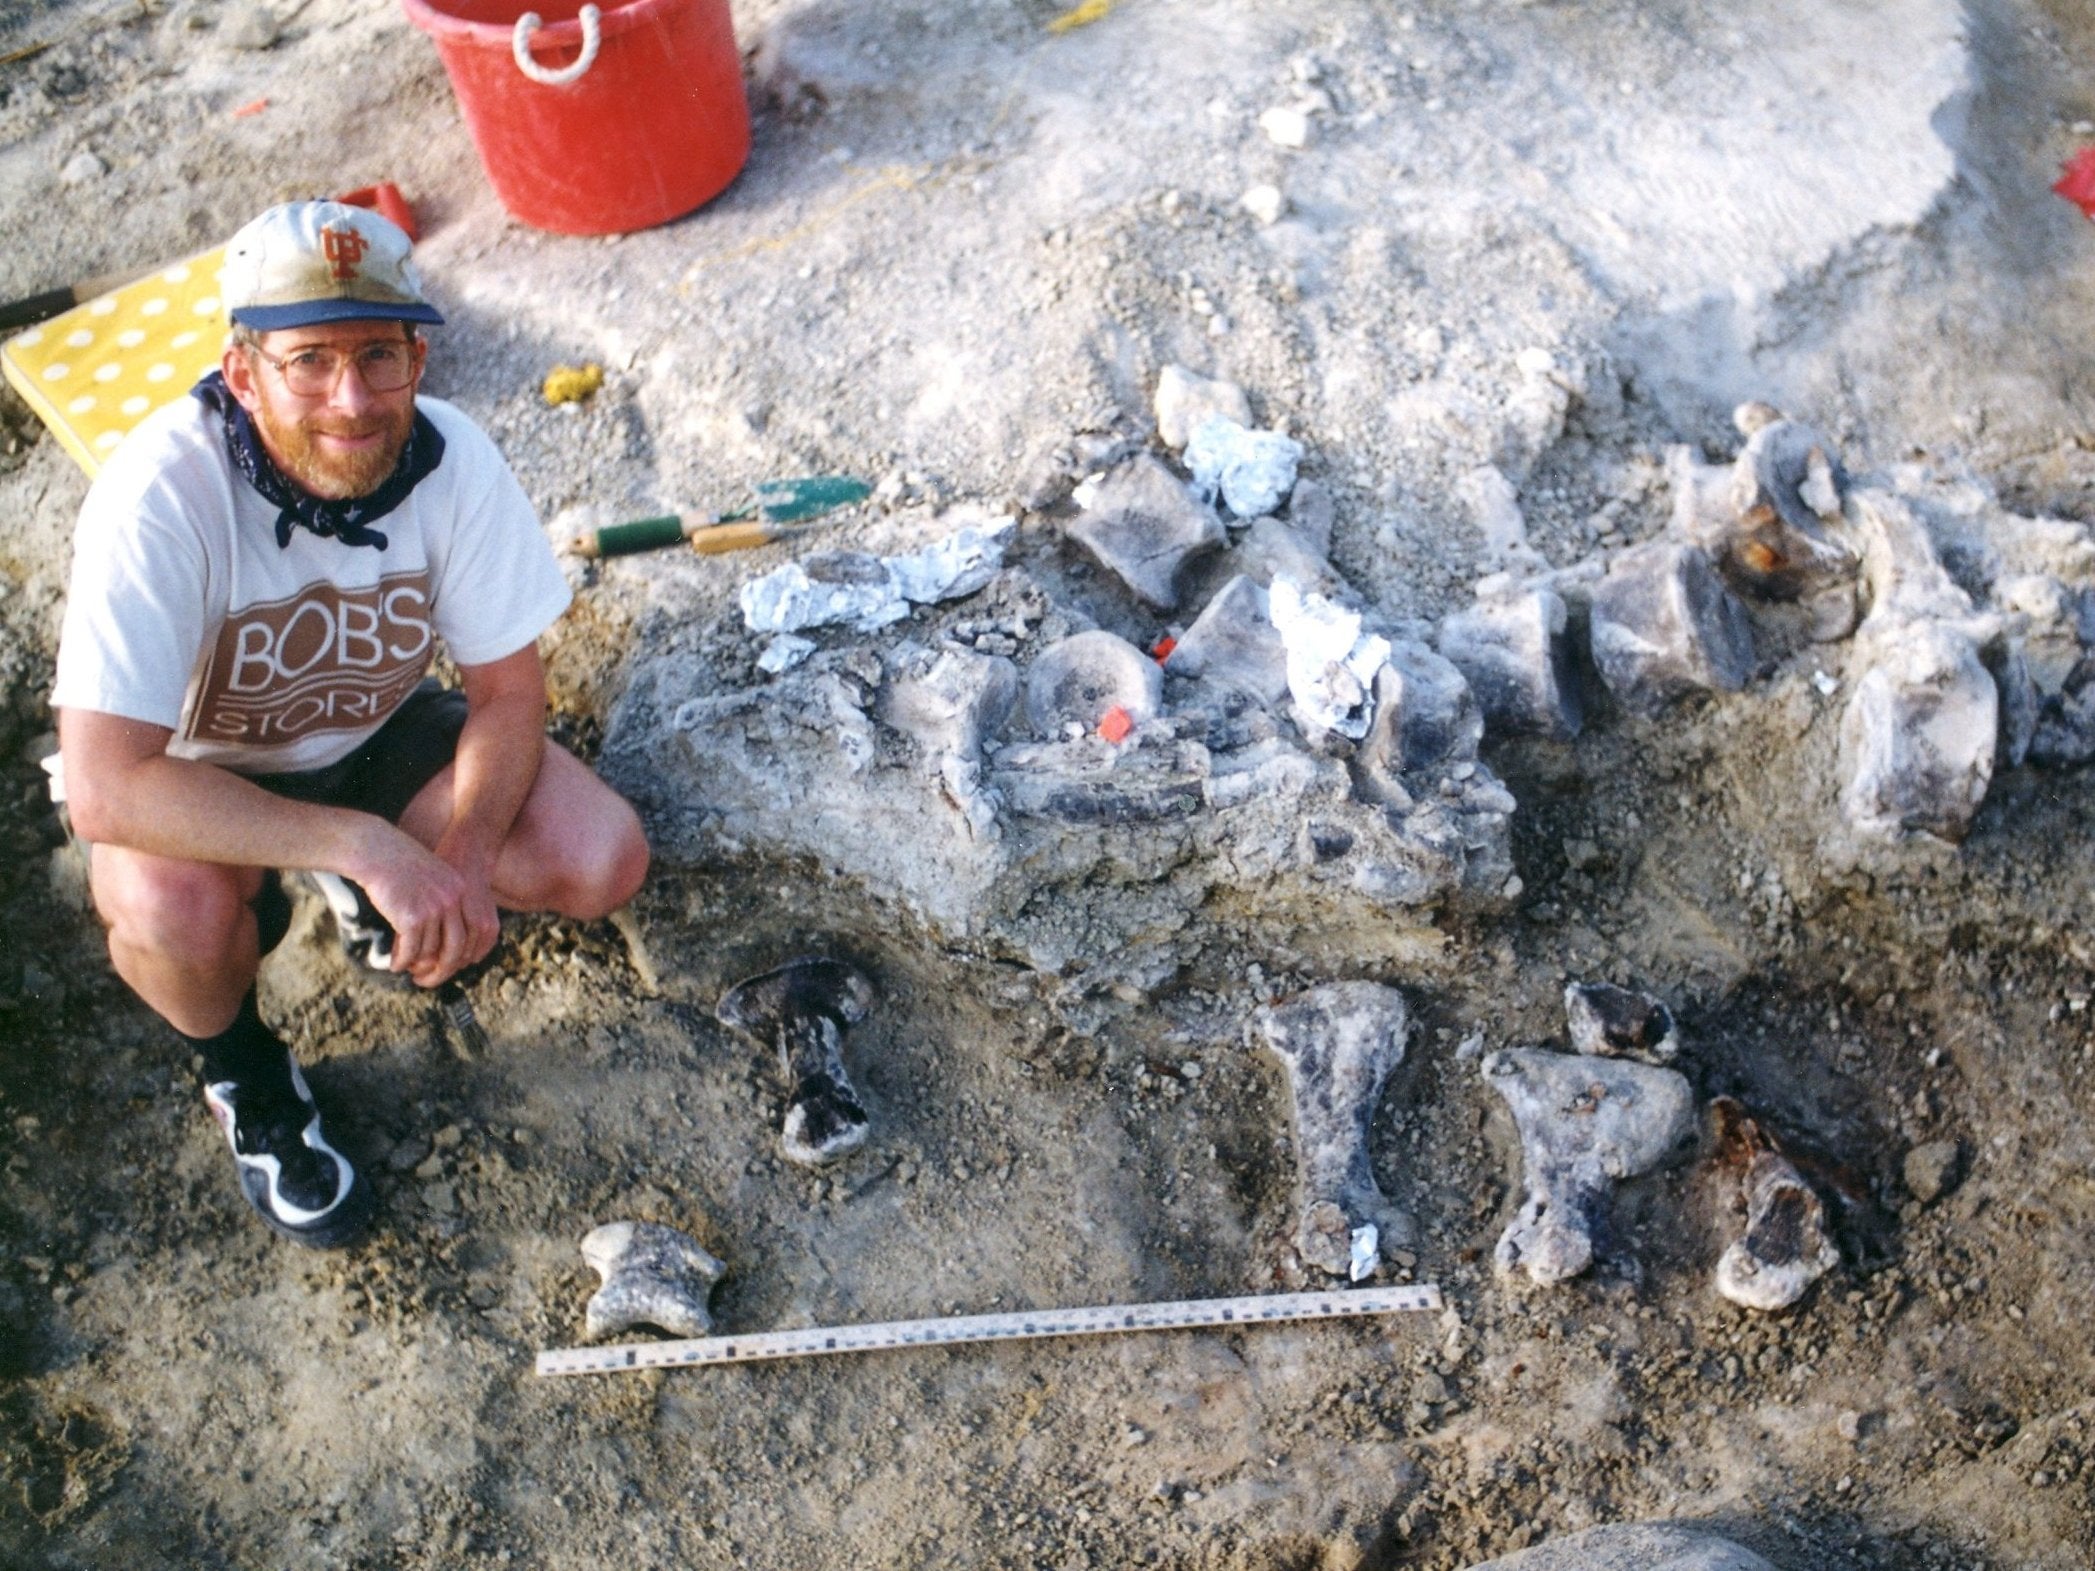 A University of Kansas expedition crew member next to the brachiosaur foot bones, below a tail of a Camarasaurus, during the 1998 excavation in Wyoming